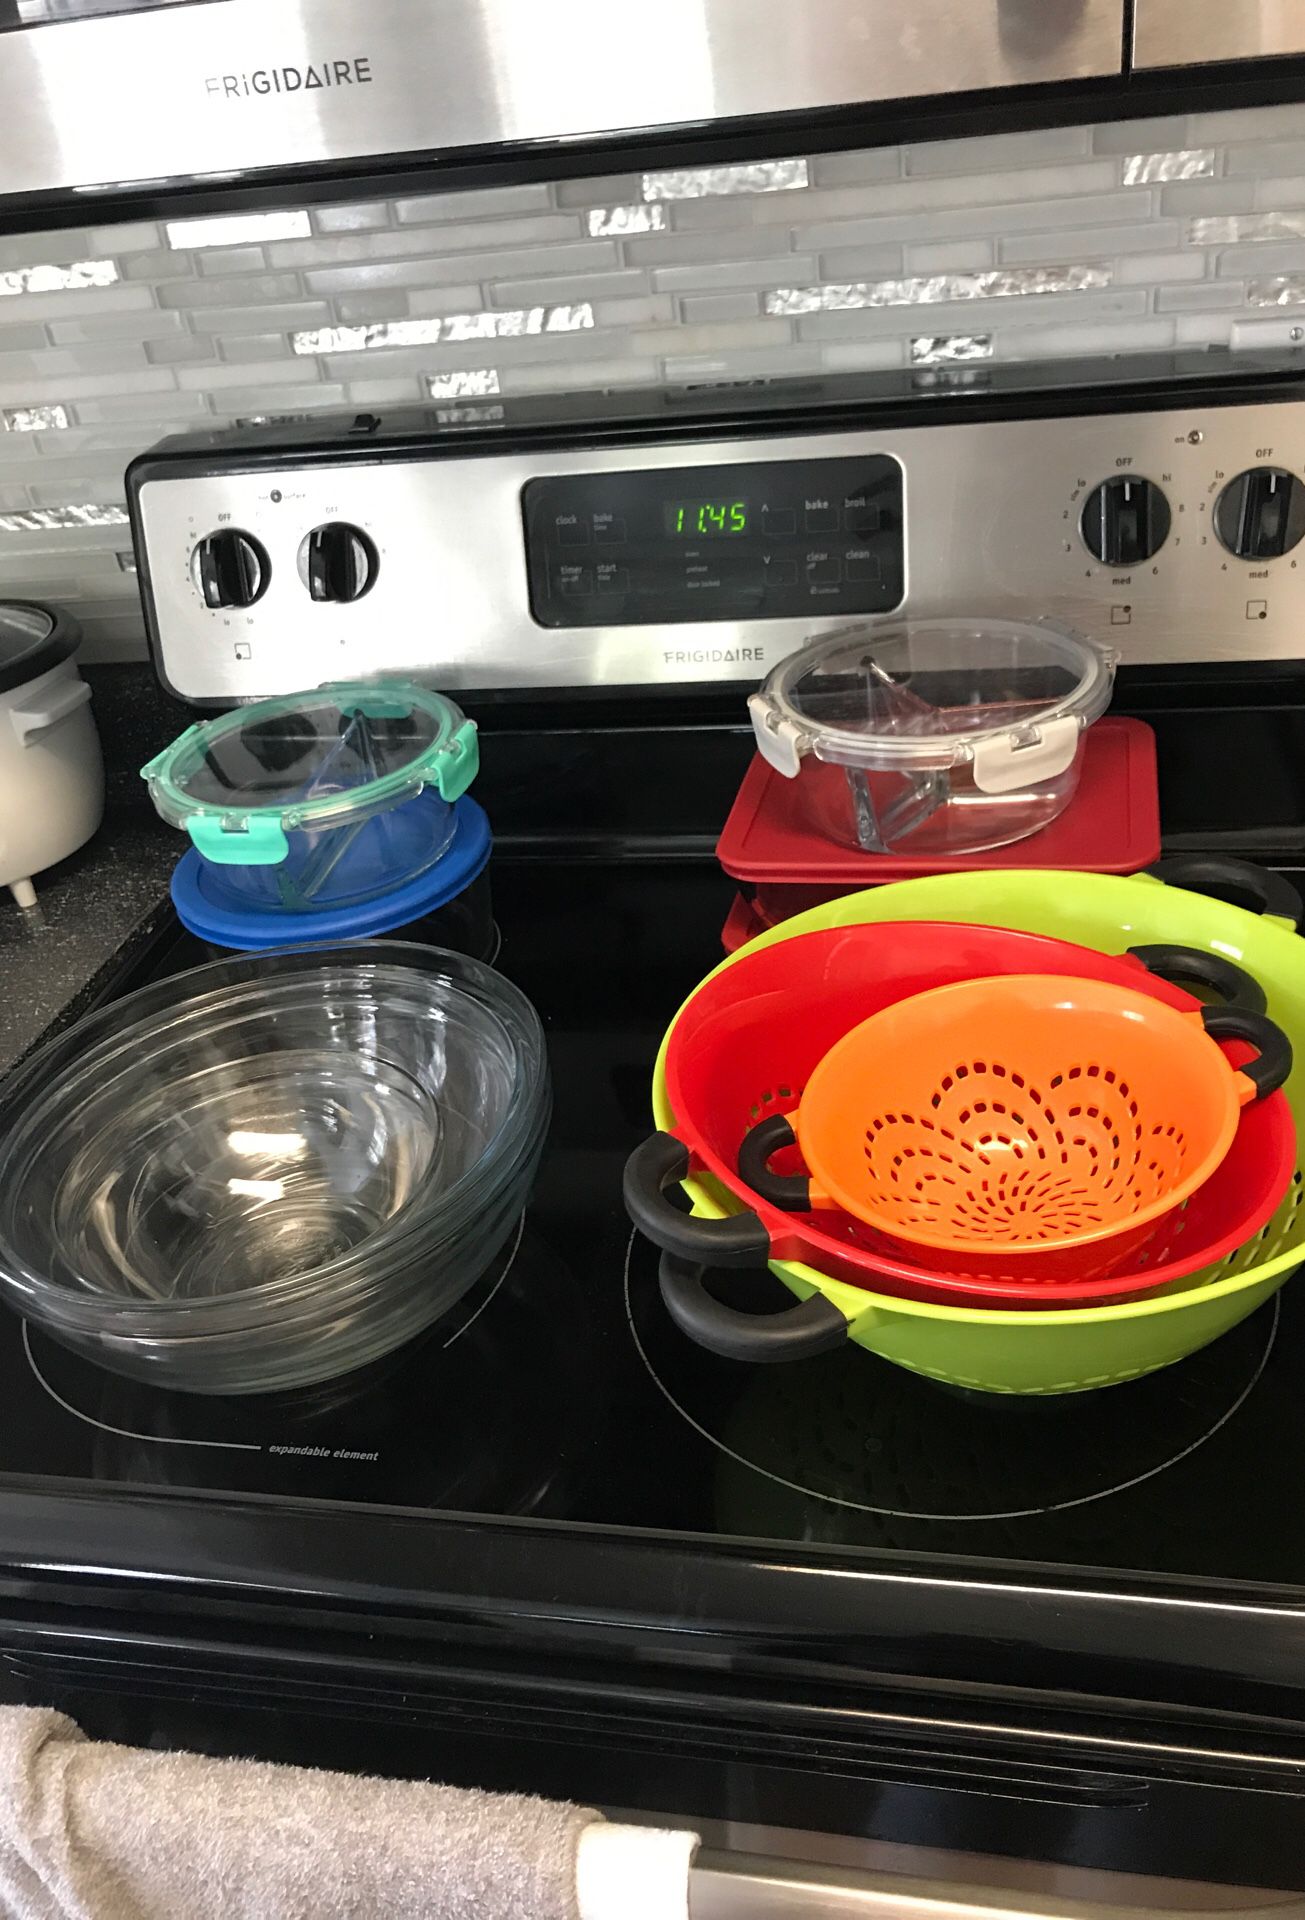 Assorted kitchen stuff - trying to get rid of ASAP!!! Shoot me a price and it is yours!